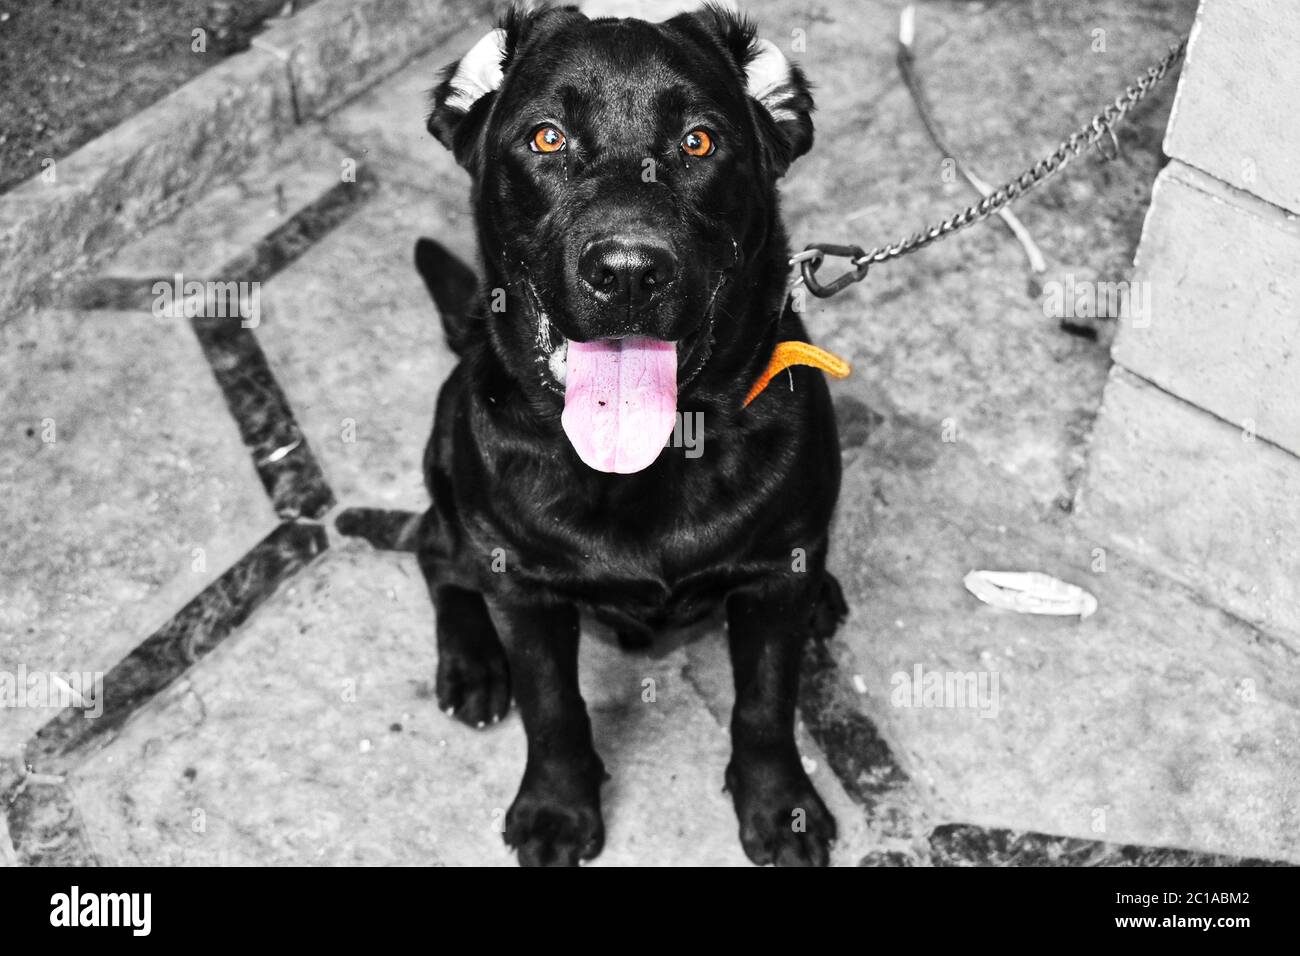 A black labrador dog sitting on the floor with its tongue outside looking at the camera.Background is made black and white to highlight the dog Stock Photo